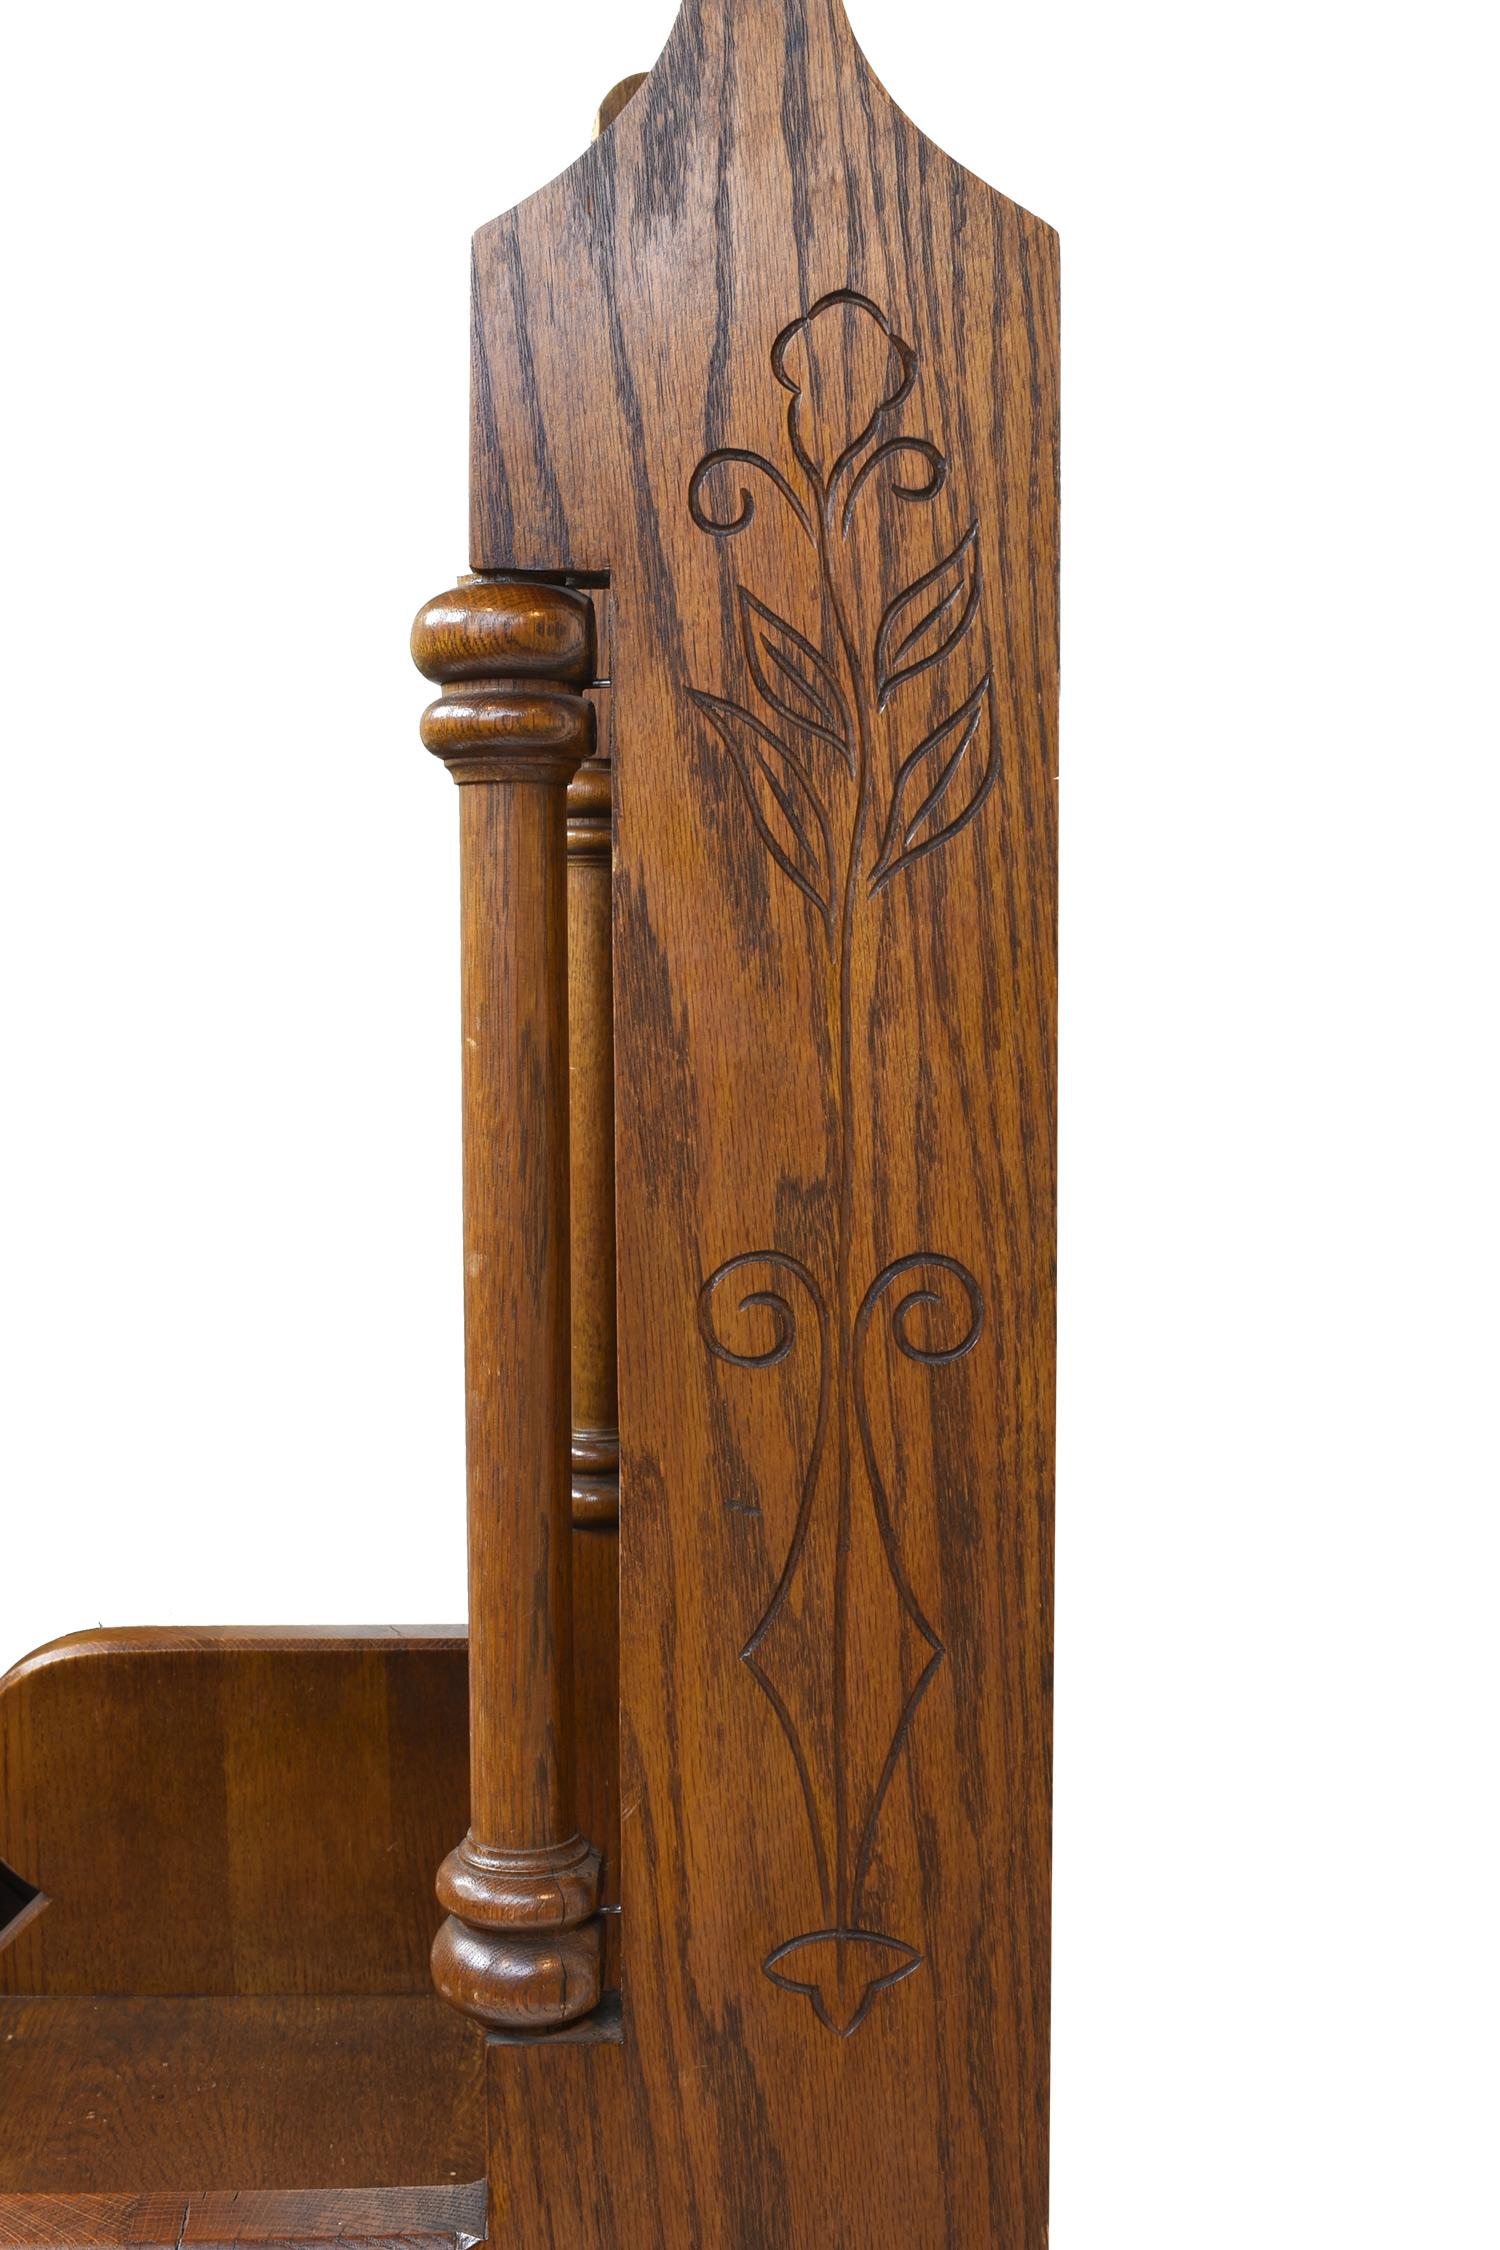 Ornate oak clergy chair with carved lilies on the side, spindles and fleur-de-lis adornments, and cross emblem, with quatrefoil cut-outs along the back,

circa 1920
Condition: Excellent
Finish: Original
Country of origin: USA

Measures: 57